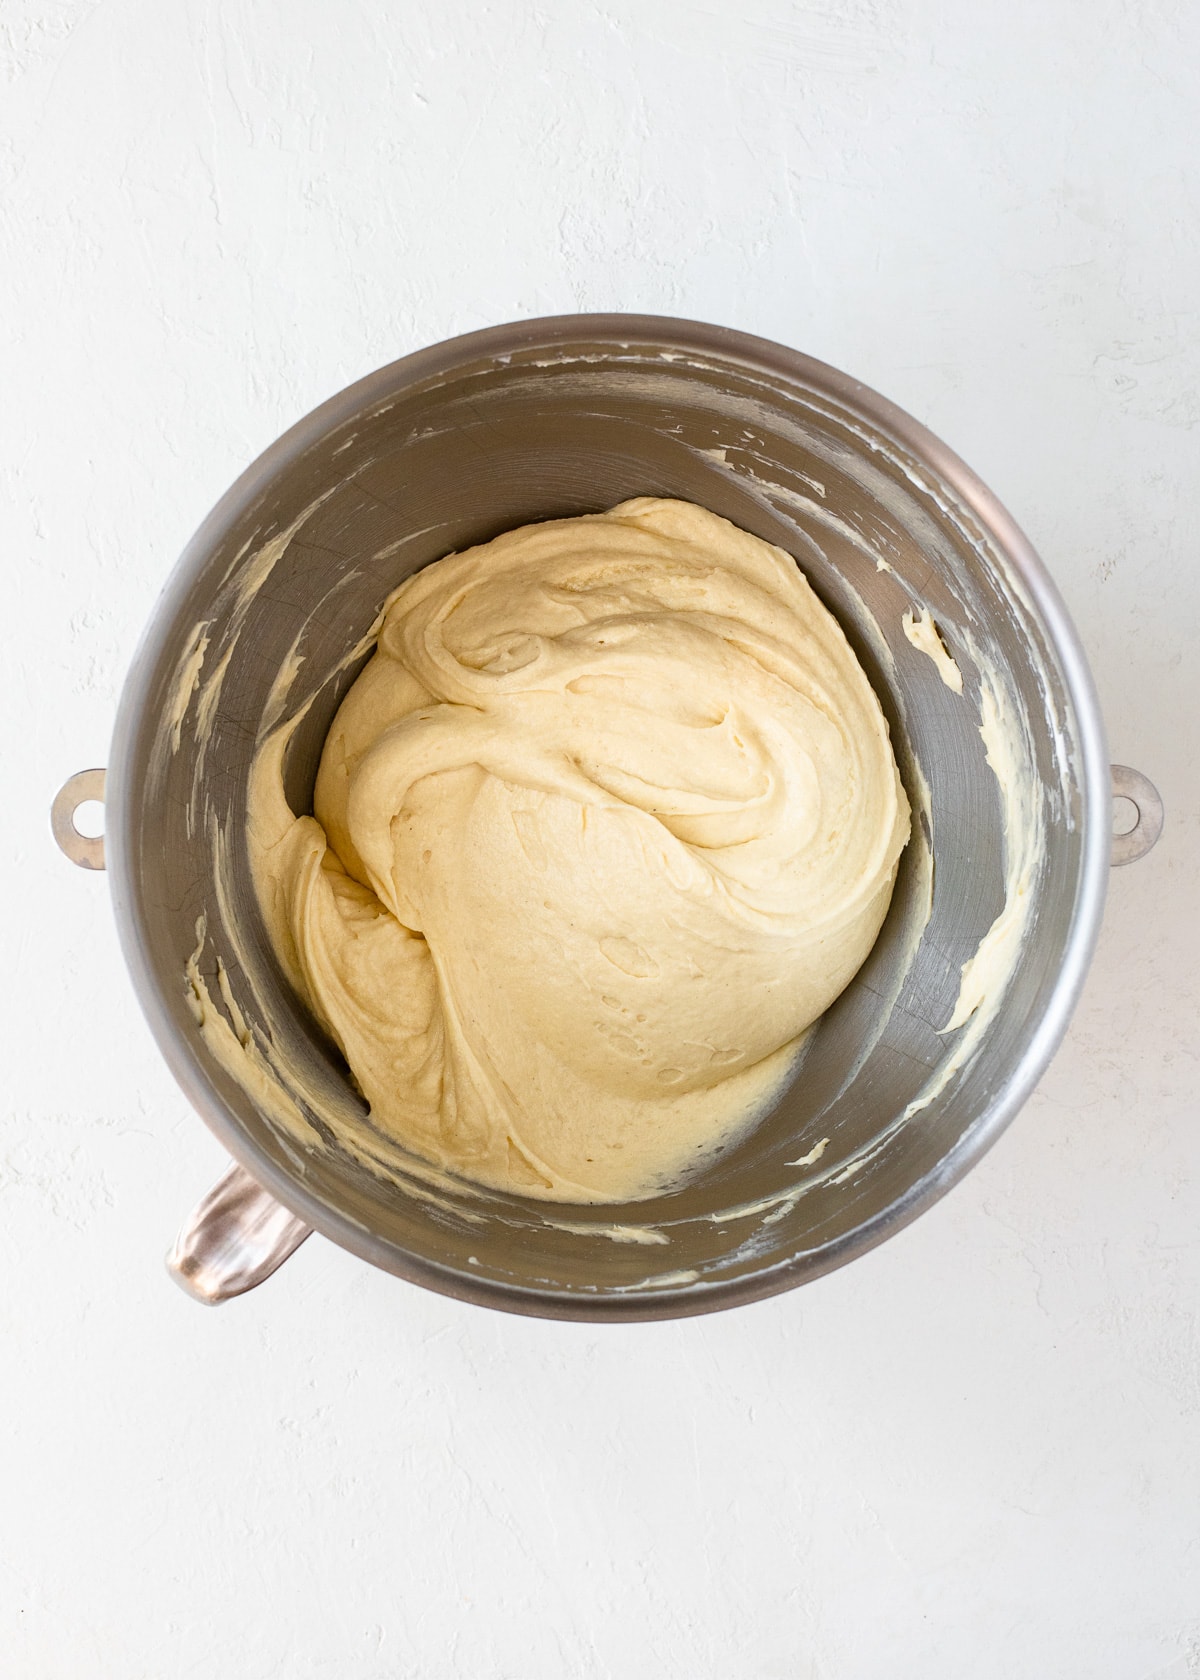 Pound cake batter in a bowl, ready to be baked.